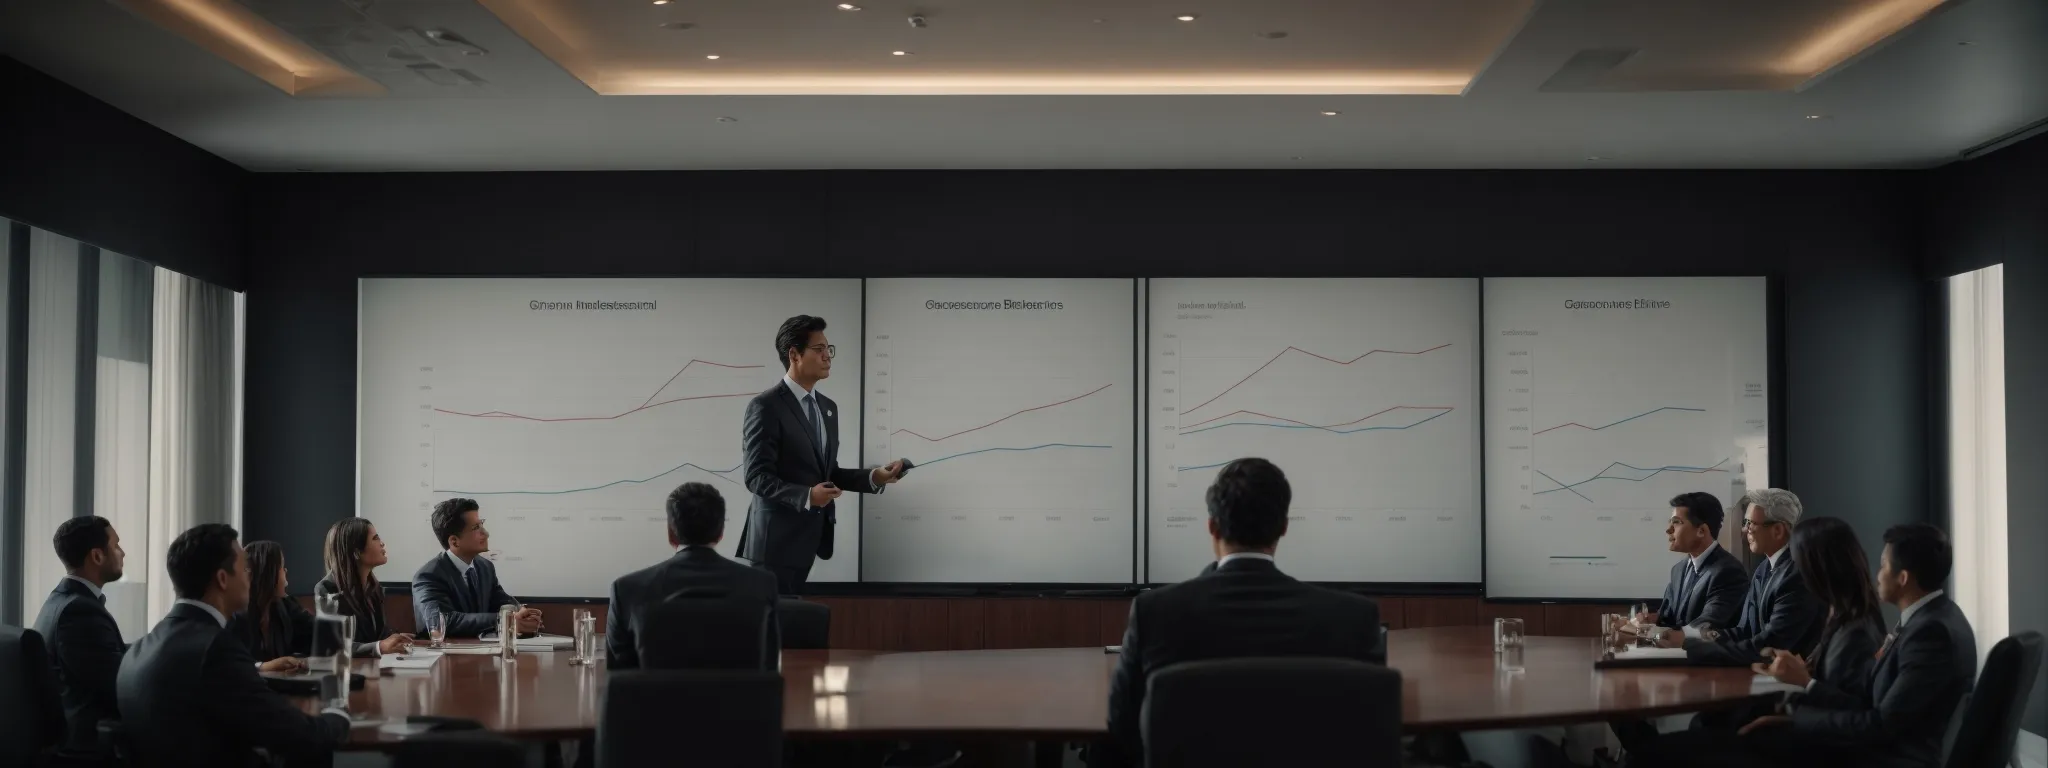 a confident business professional presents a chart showing growth to a boardroom of attentive executives.